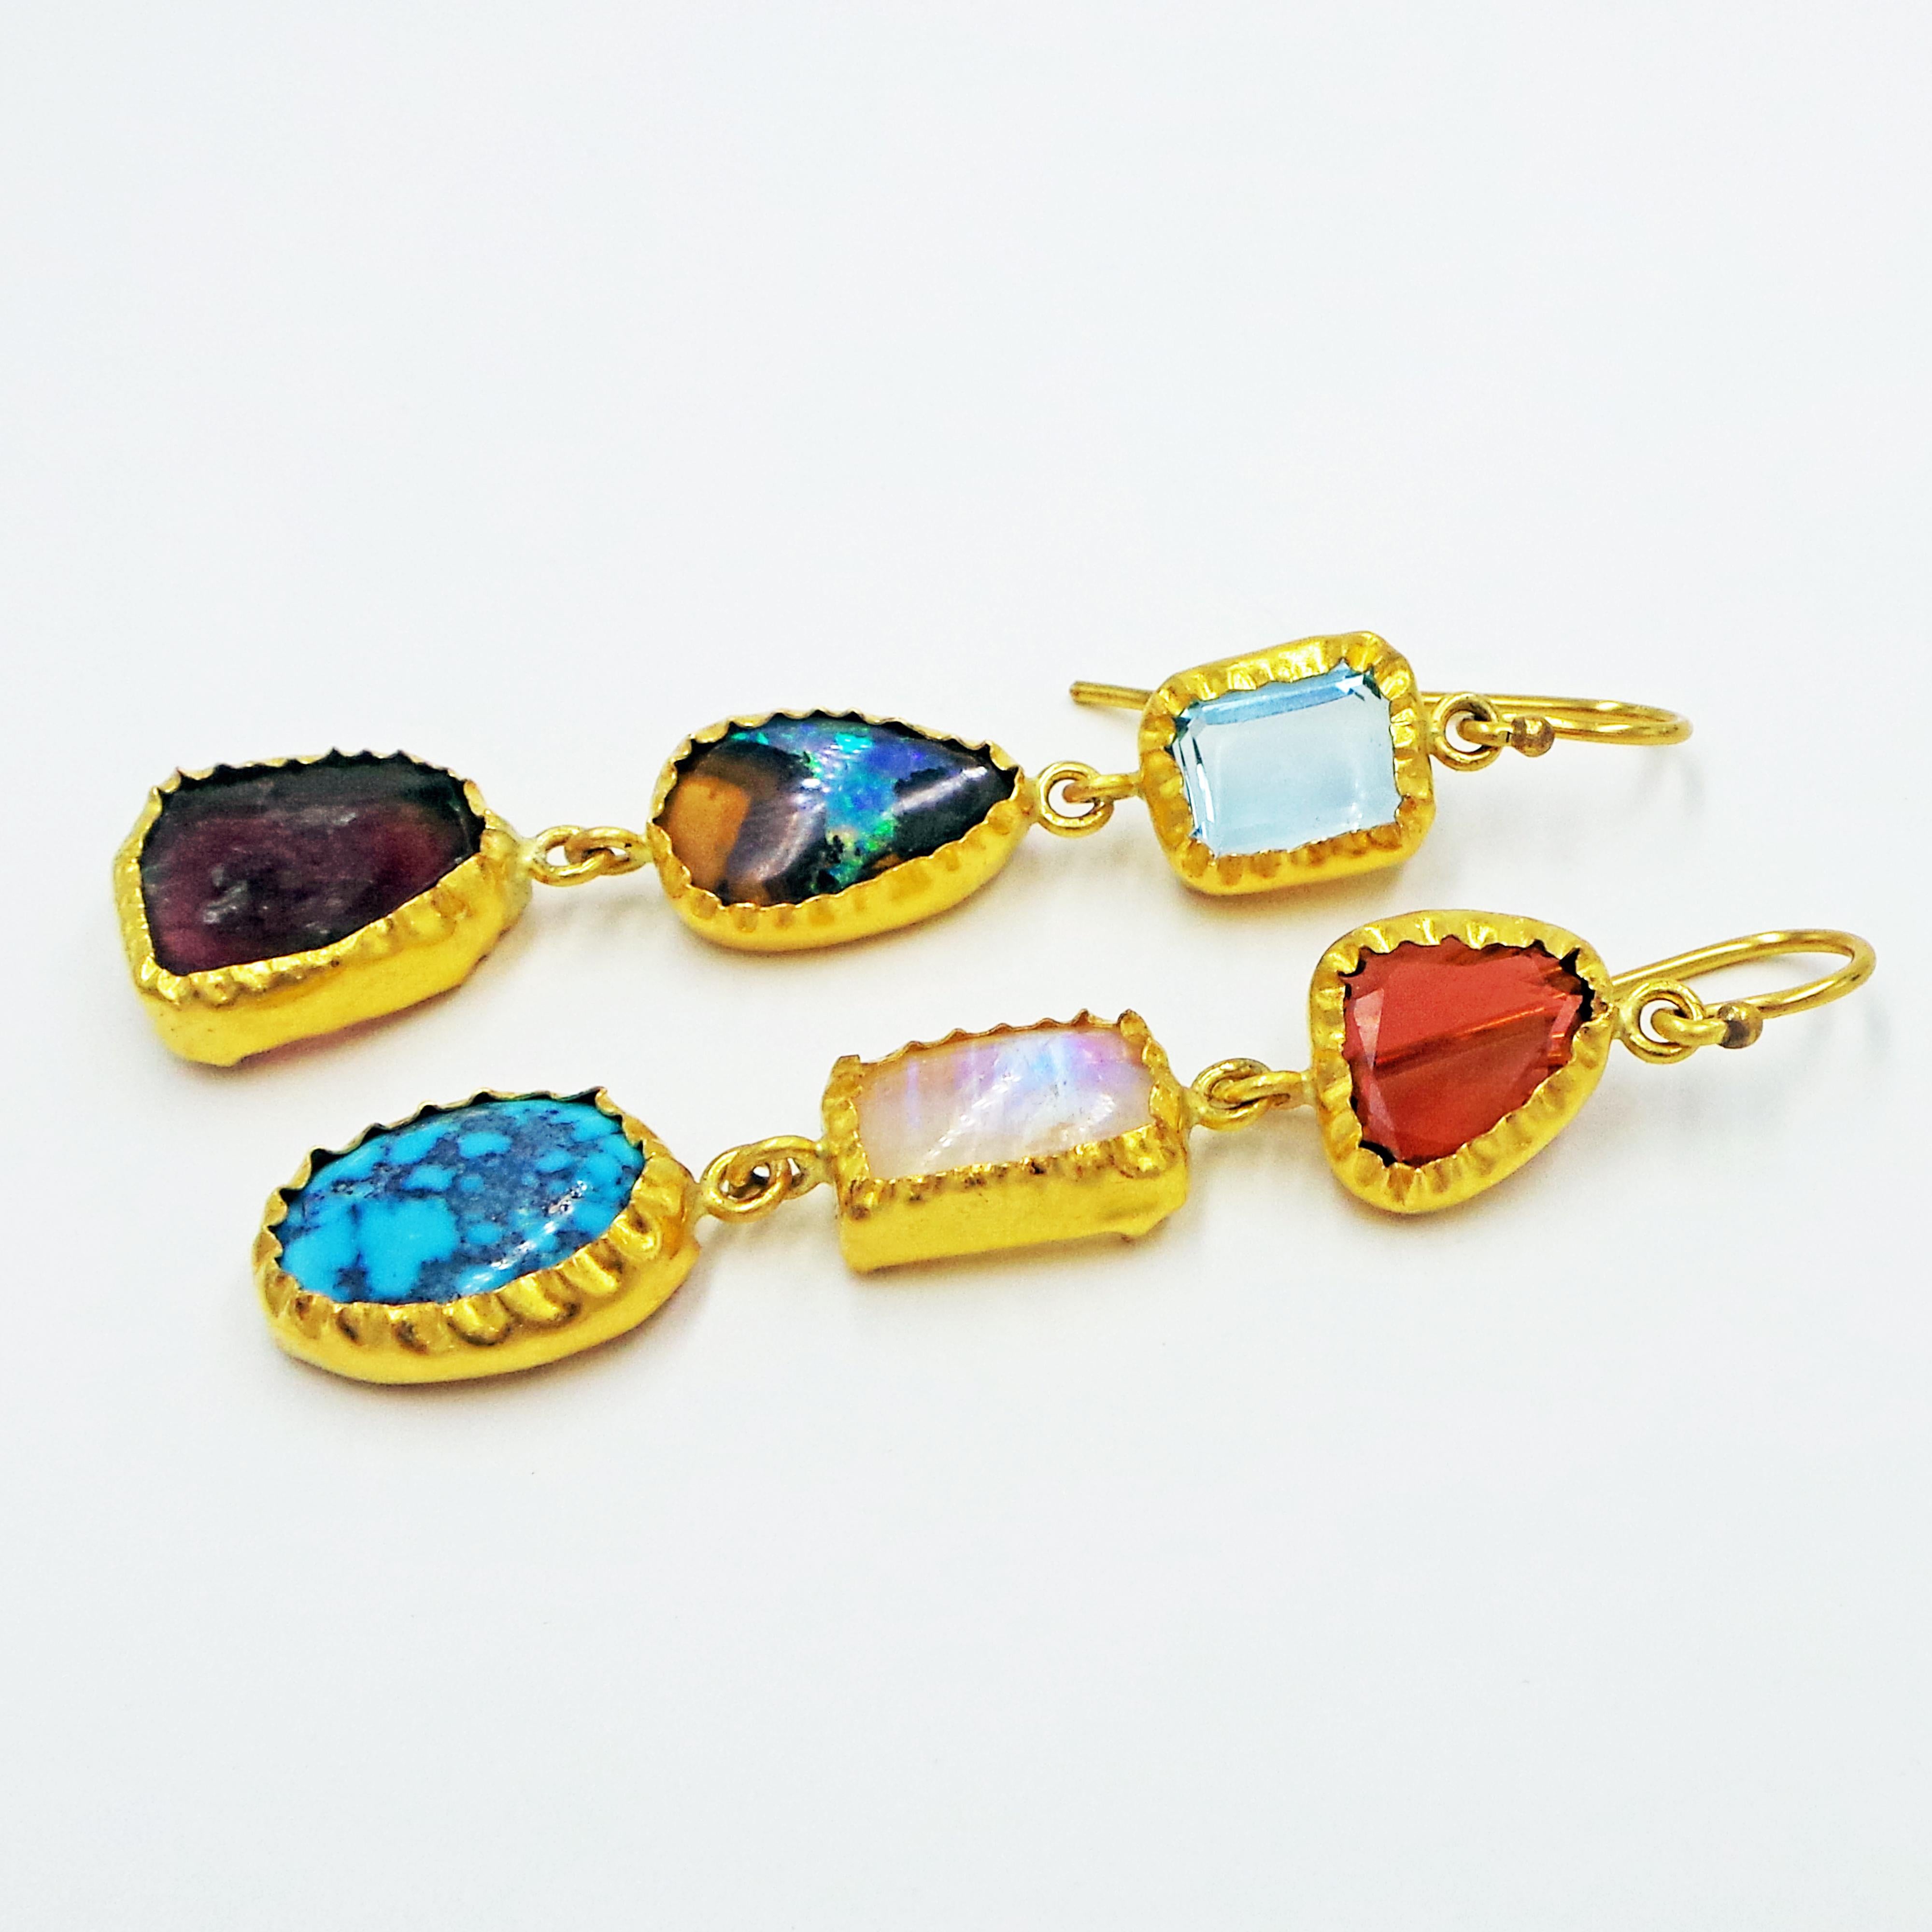 Gorgeous, one-of-a-kind multi-gemstone dangle earrings wrapped in 22k yellow gold. Gemstones include Aquamarine, Australian Boulder Opal, Russian Watermelon Tourmaline slice, Garnet, Moonstone and Kingman Turquoise. Unique, lively, and colorful pair